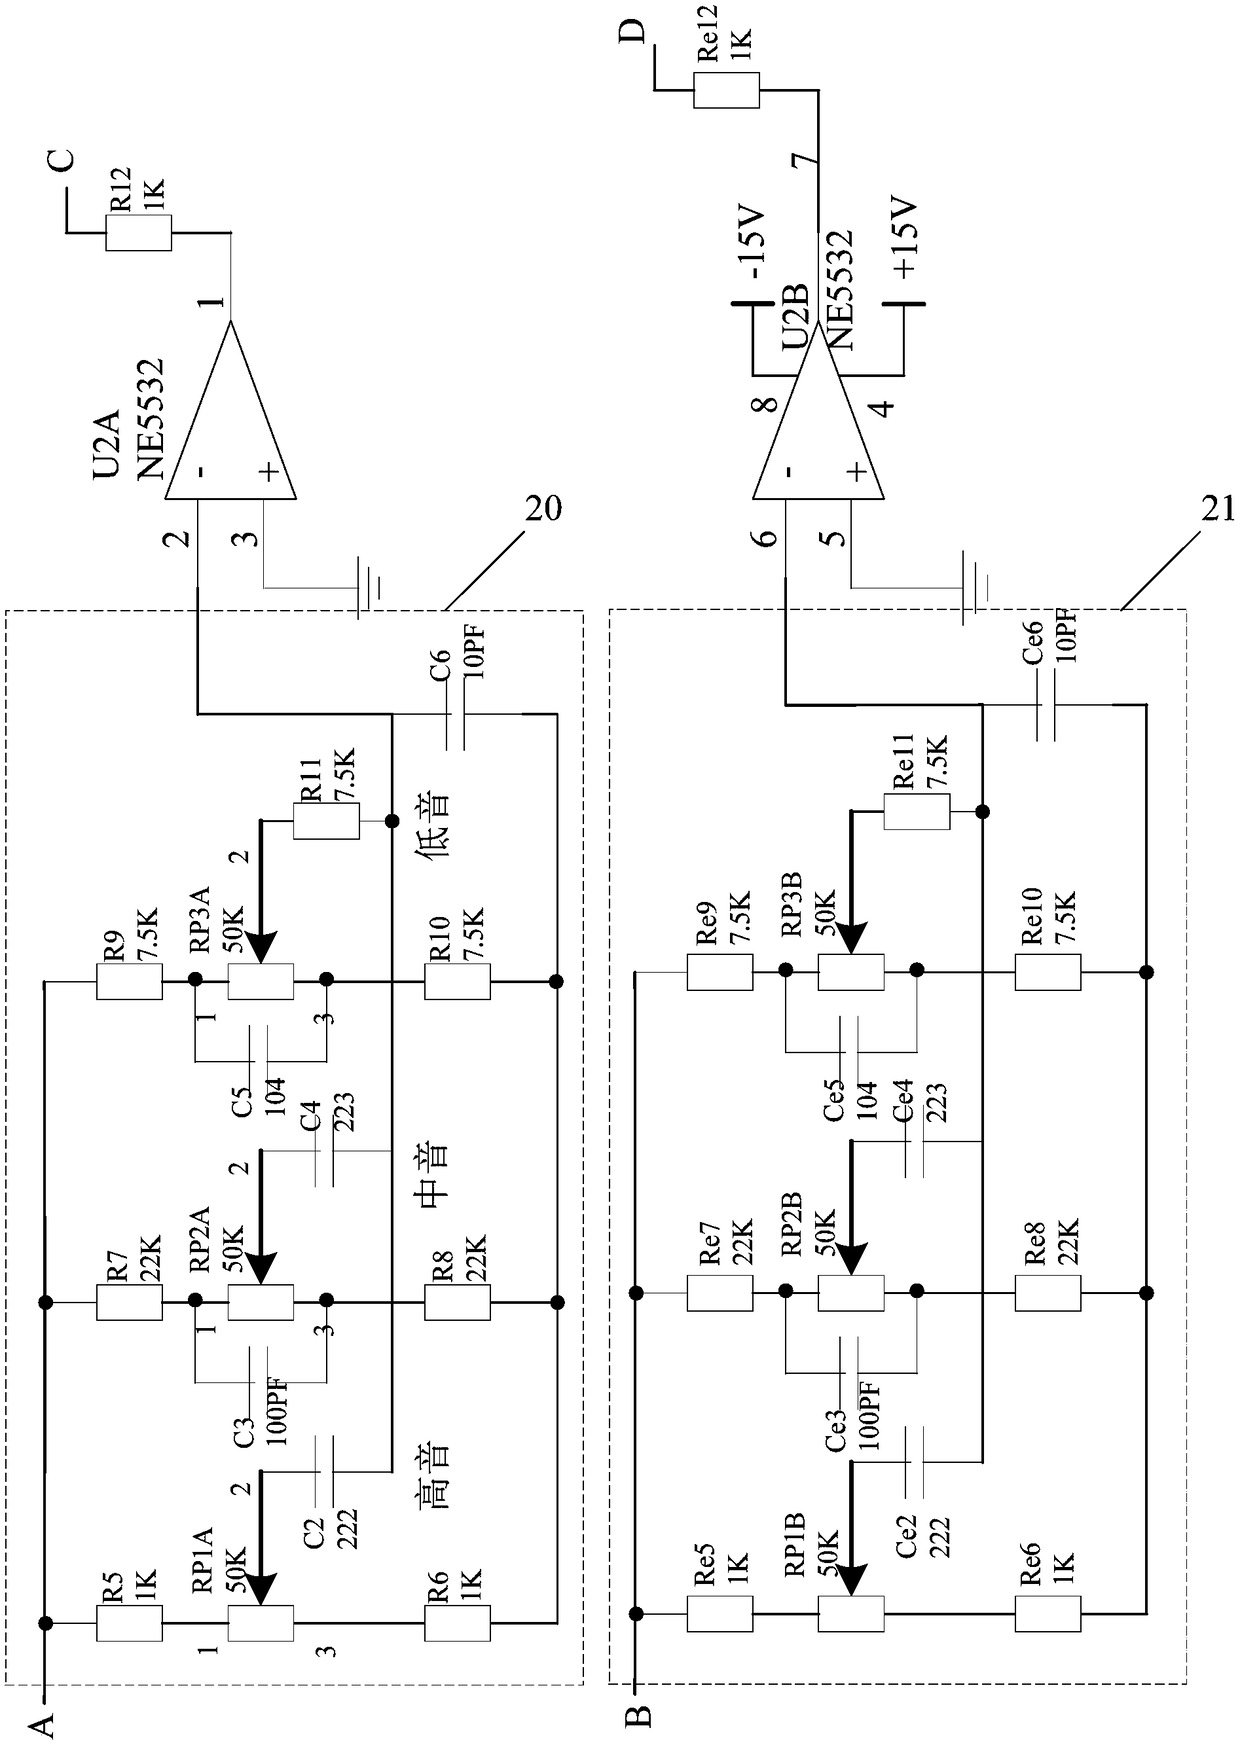 Tone regulation and control circuit based on NE5532 chip